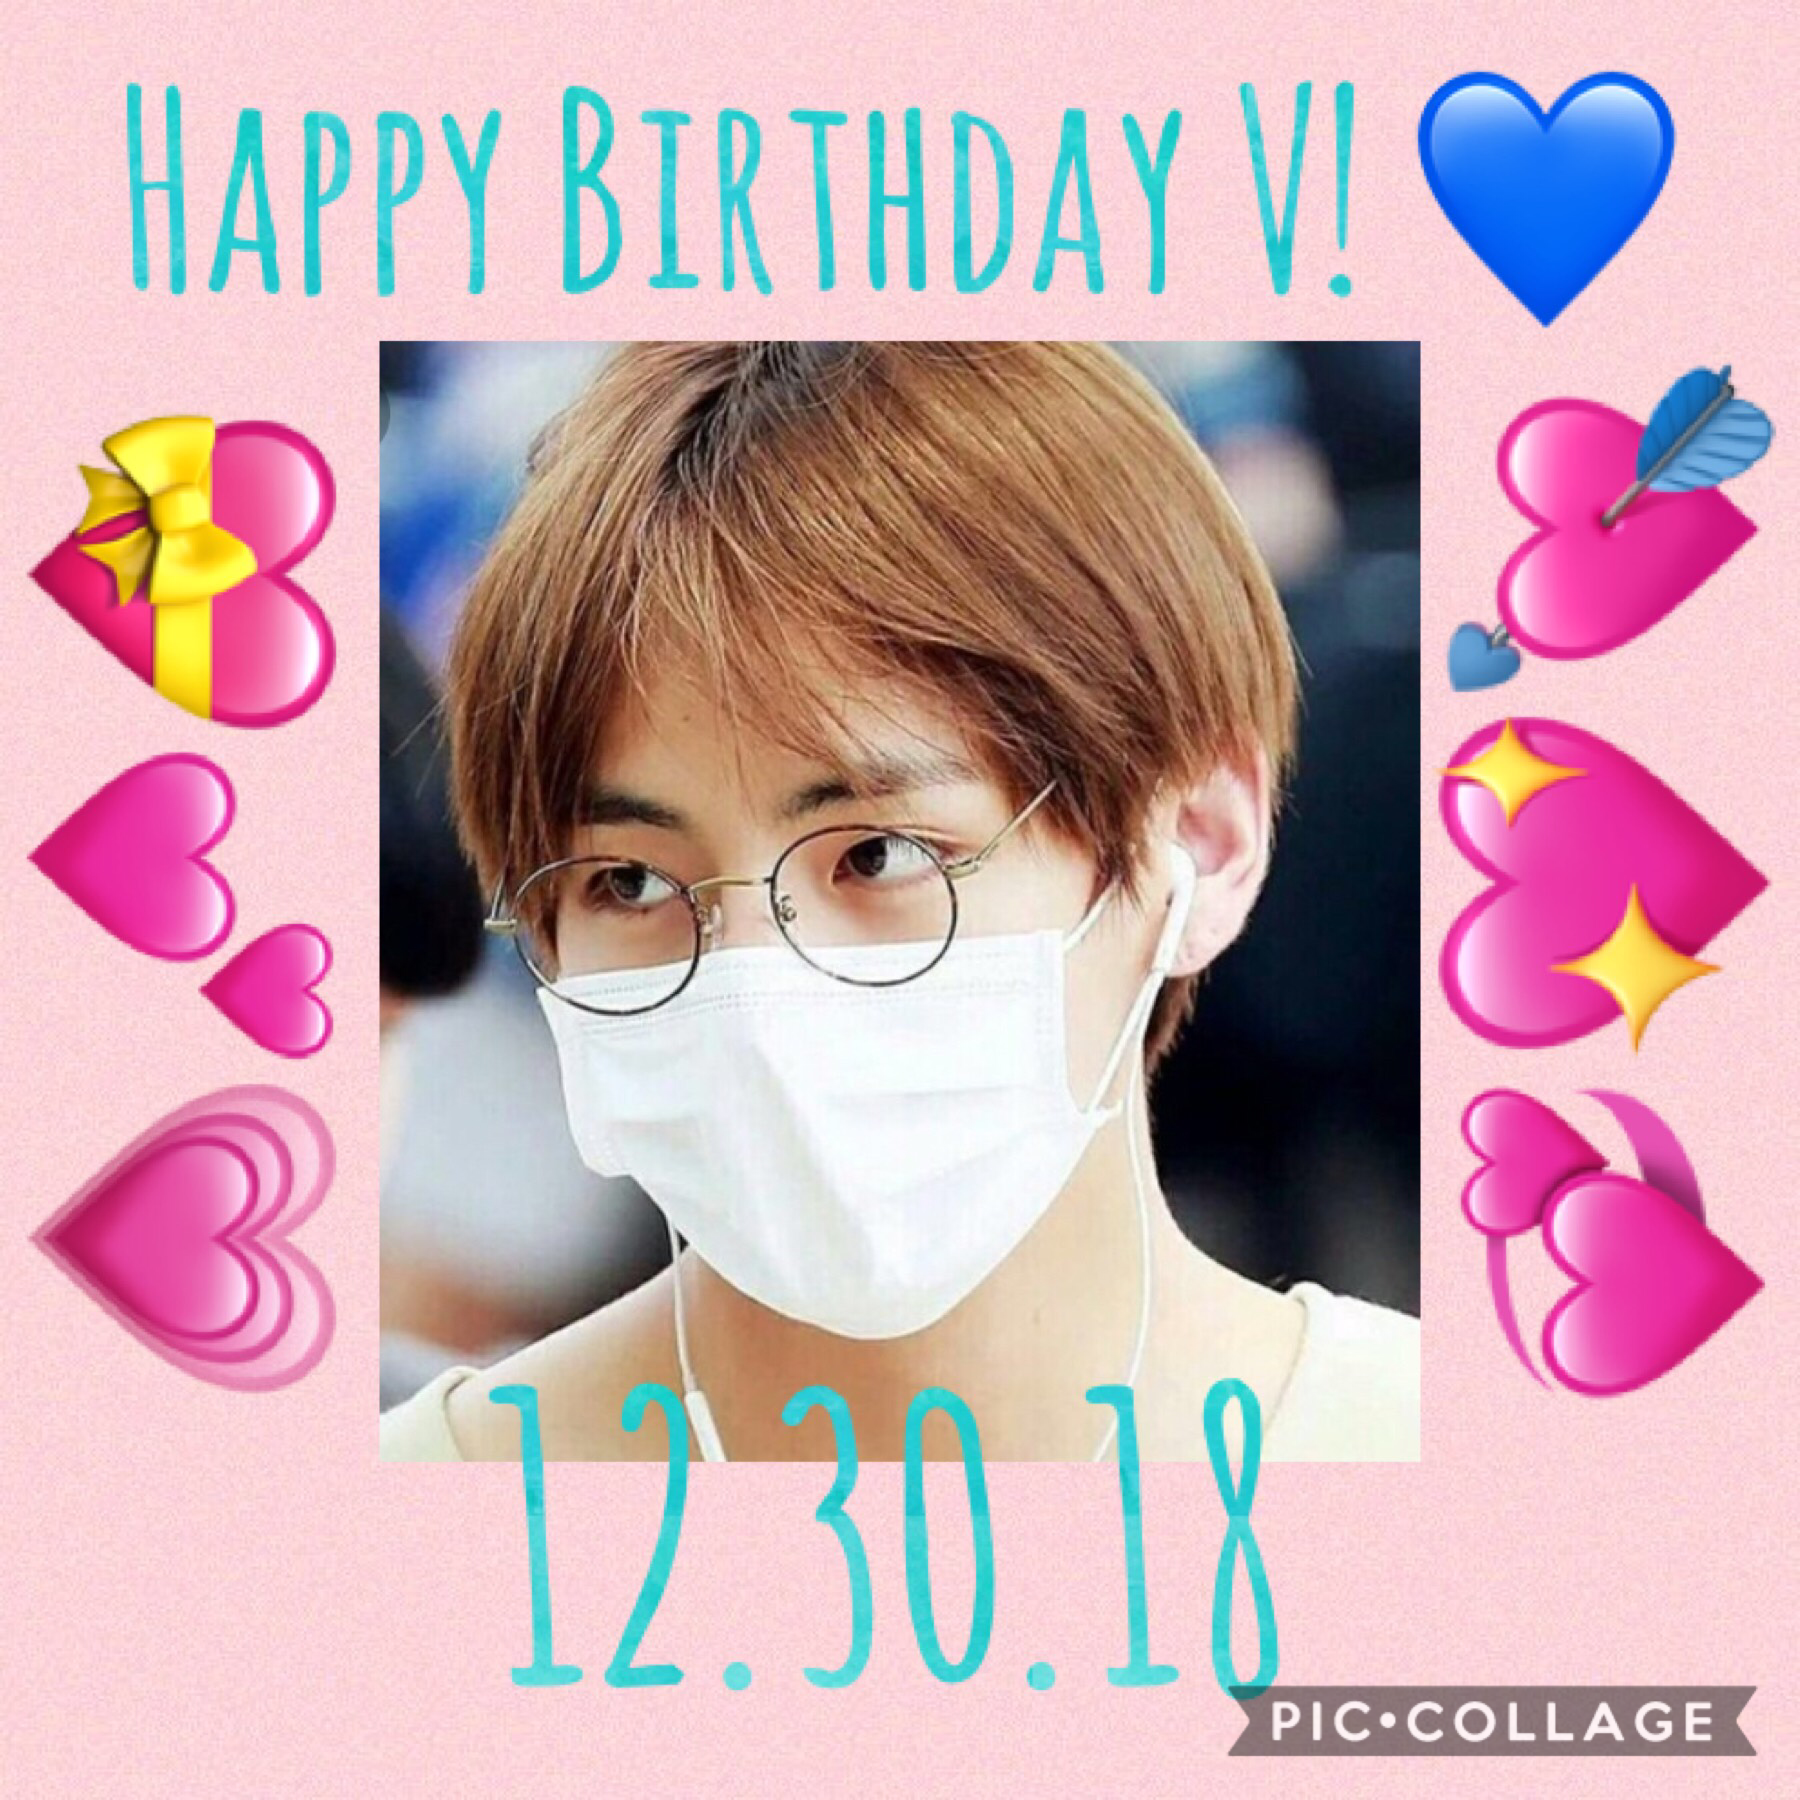 HAPPY BIRTHDAY V WITH LOVE FROM ARMY!!❤️